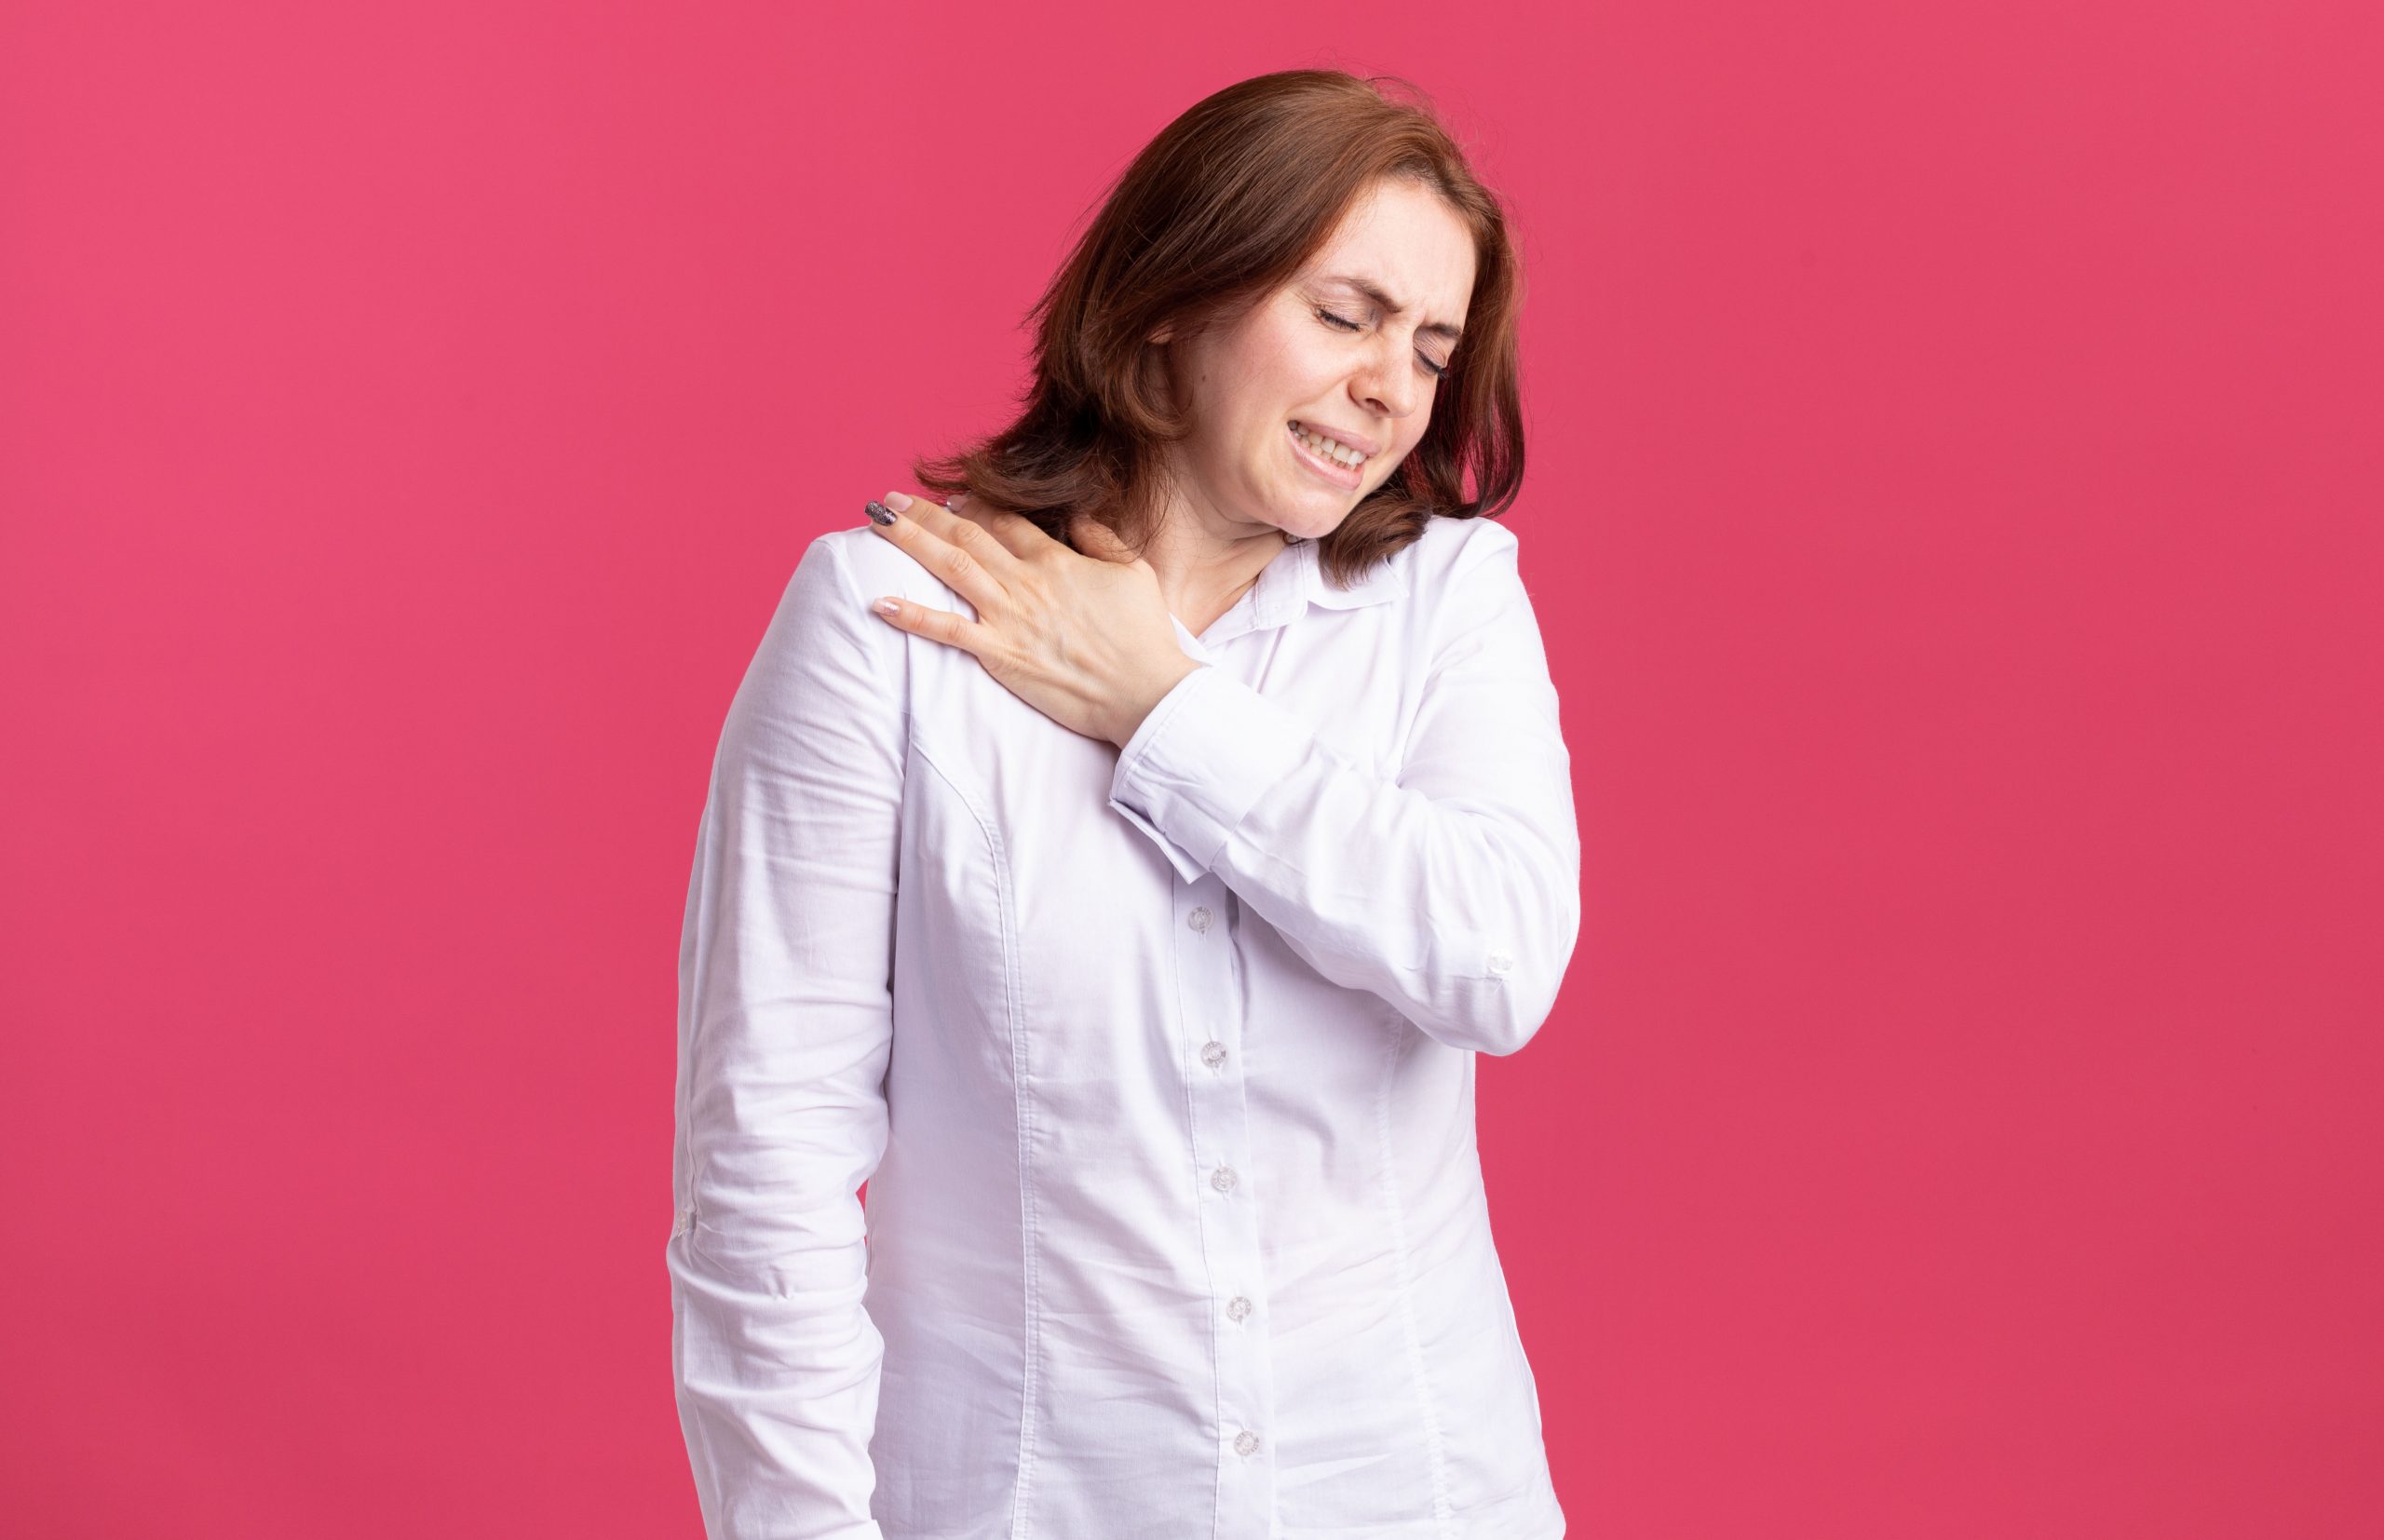 5 simple stretches for shoulder pain